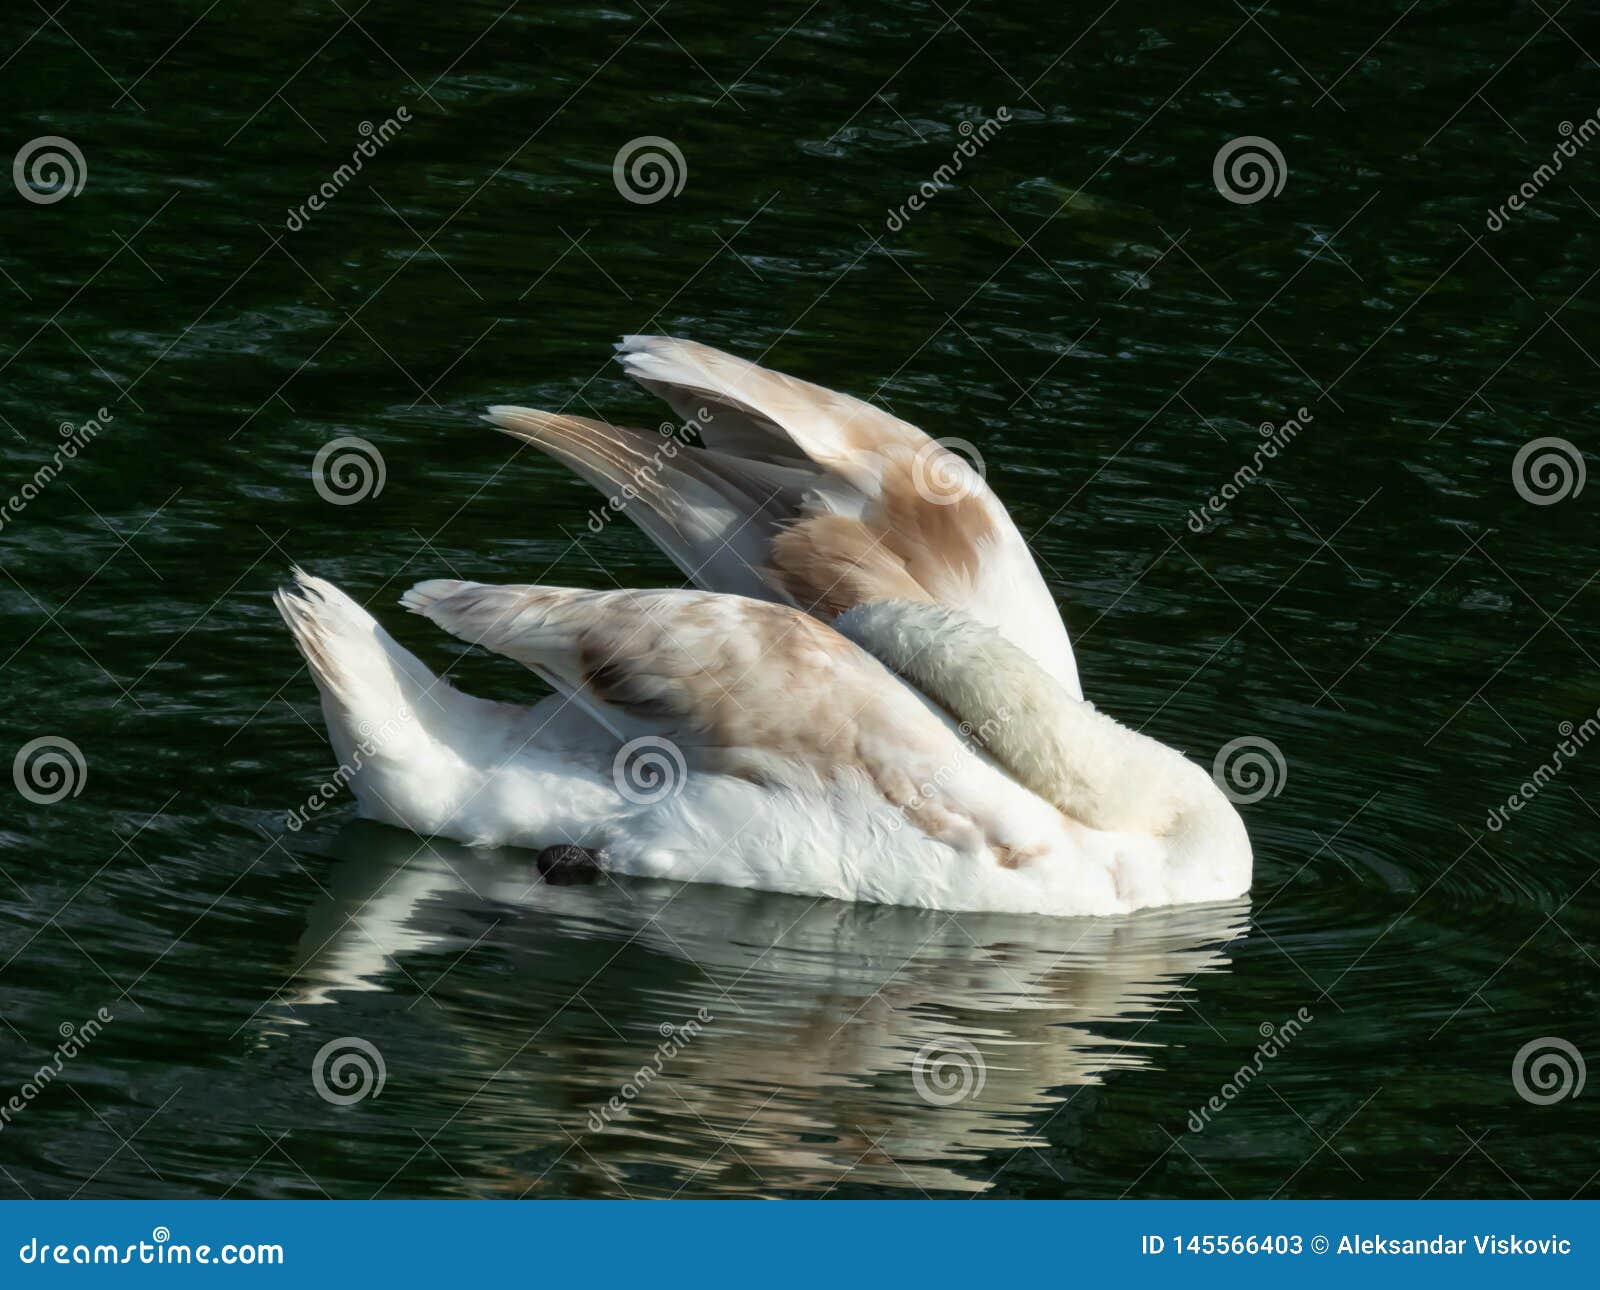 Swan on a blue pond water. Gorgeous swan on a blue water pond close up. Swan on a calm water.